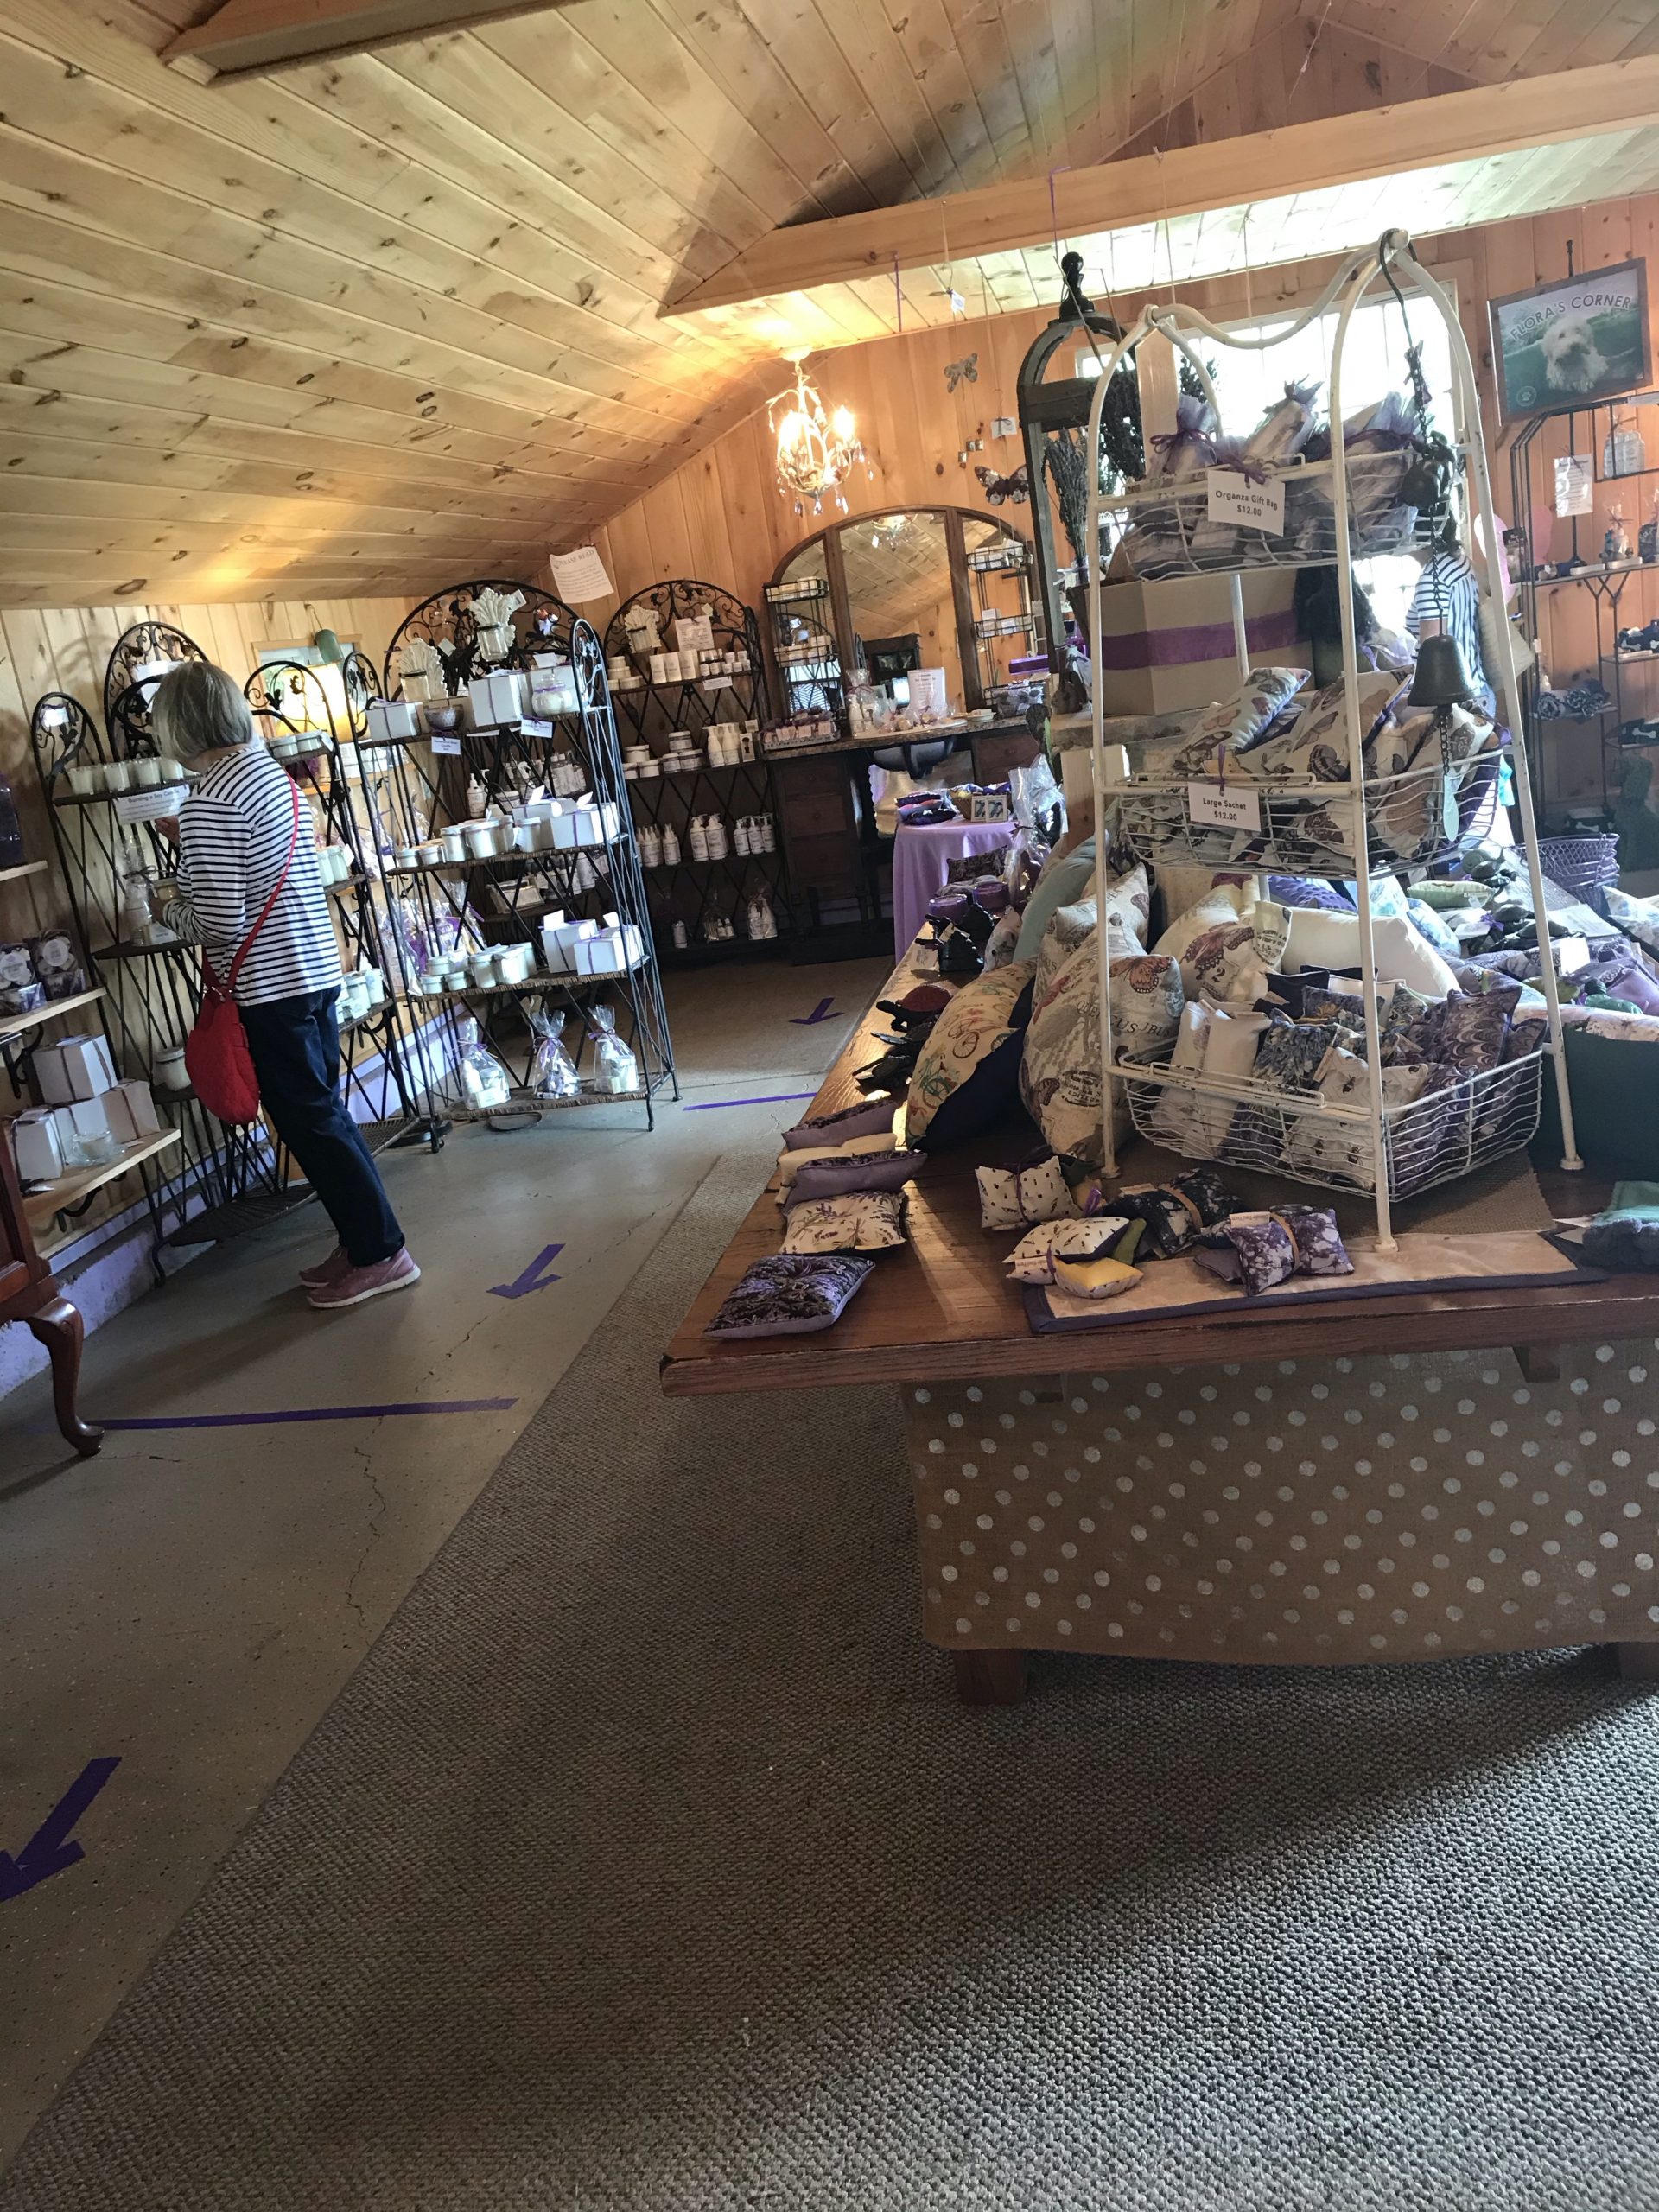 The Lavender Pond Farm in Killingworth, Connecticut with kids